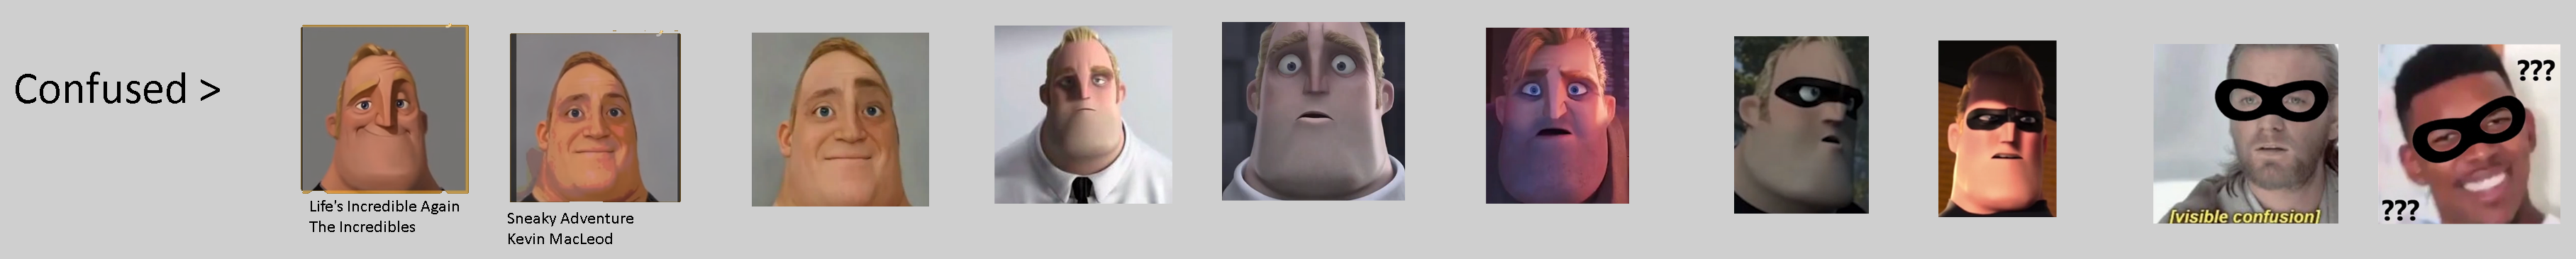 Phase 25 Angry Carsonlee0205, The Mr Incredible Becoming Memes Wiki